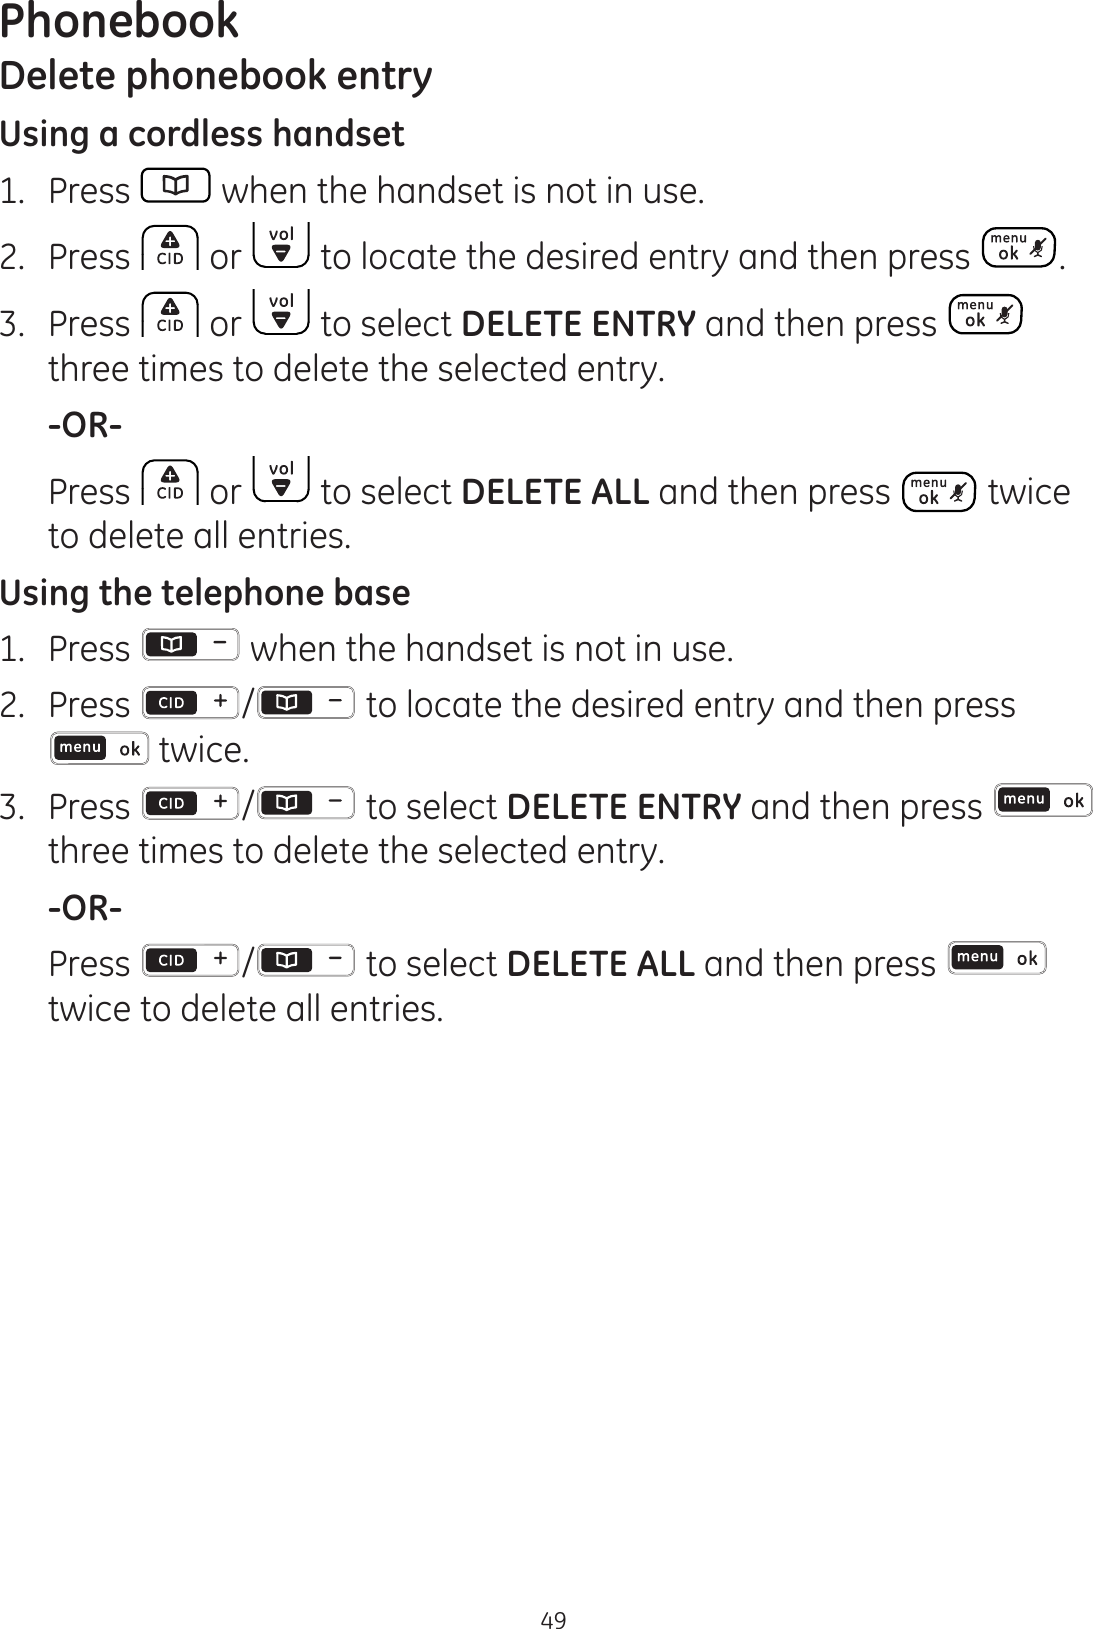 Phonebook49Delete phonebook entryUsing a cordless handset1.  Press   when the handset is not in use.2.  Press  or   to locate the desired entry and then press  .3.  Press   or   to select DELETE ENTRY and then press   three times to delete the selected entry.  -OR-  Press   or   to select DELETE ALL and then press   twice to delete all entries.Using the telephone base 1.  Press   when the handset is not in use.2.  Press  /  to locate the desired entry and then press  twice.3.  Press  /  to select DELETE ENTRY and then press   three times to delete the selected entry.  -OR-  Press  / to select DELETE ALL and then press   twice to delete all entries.